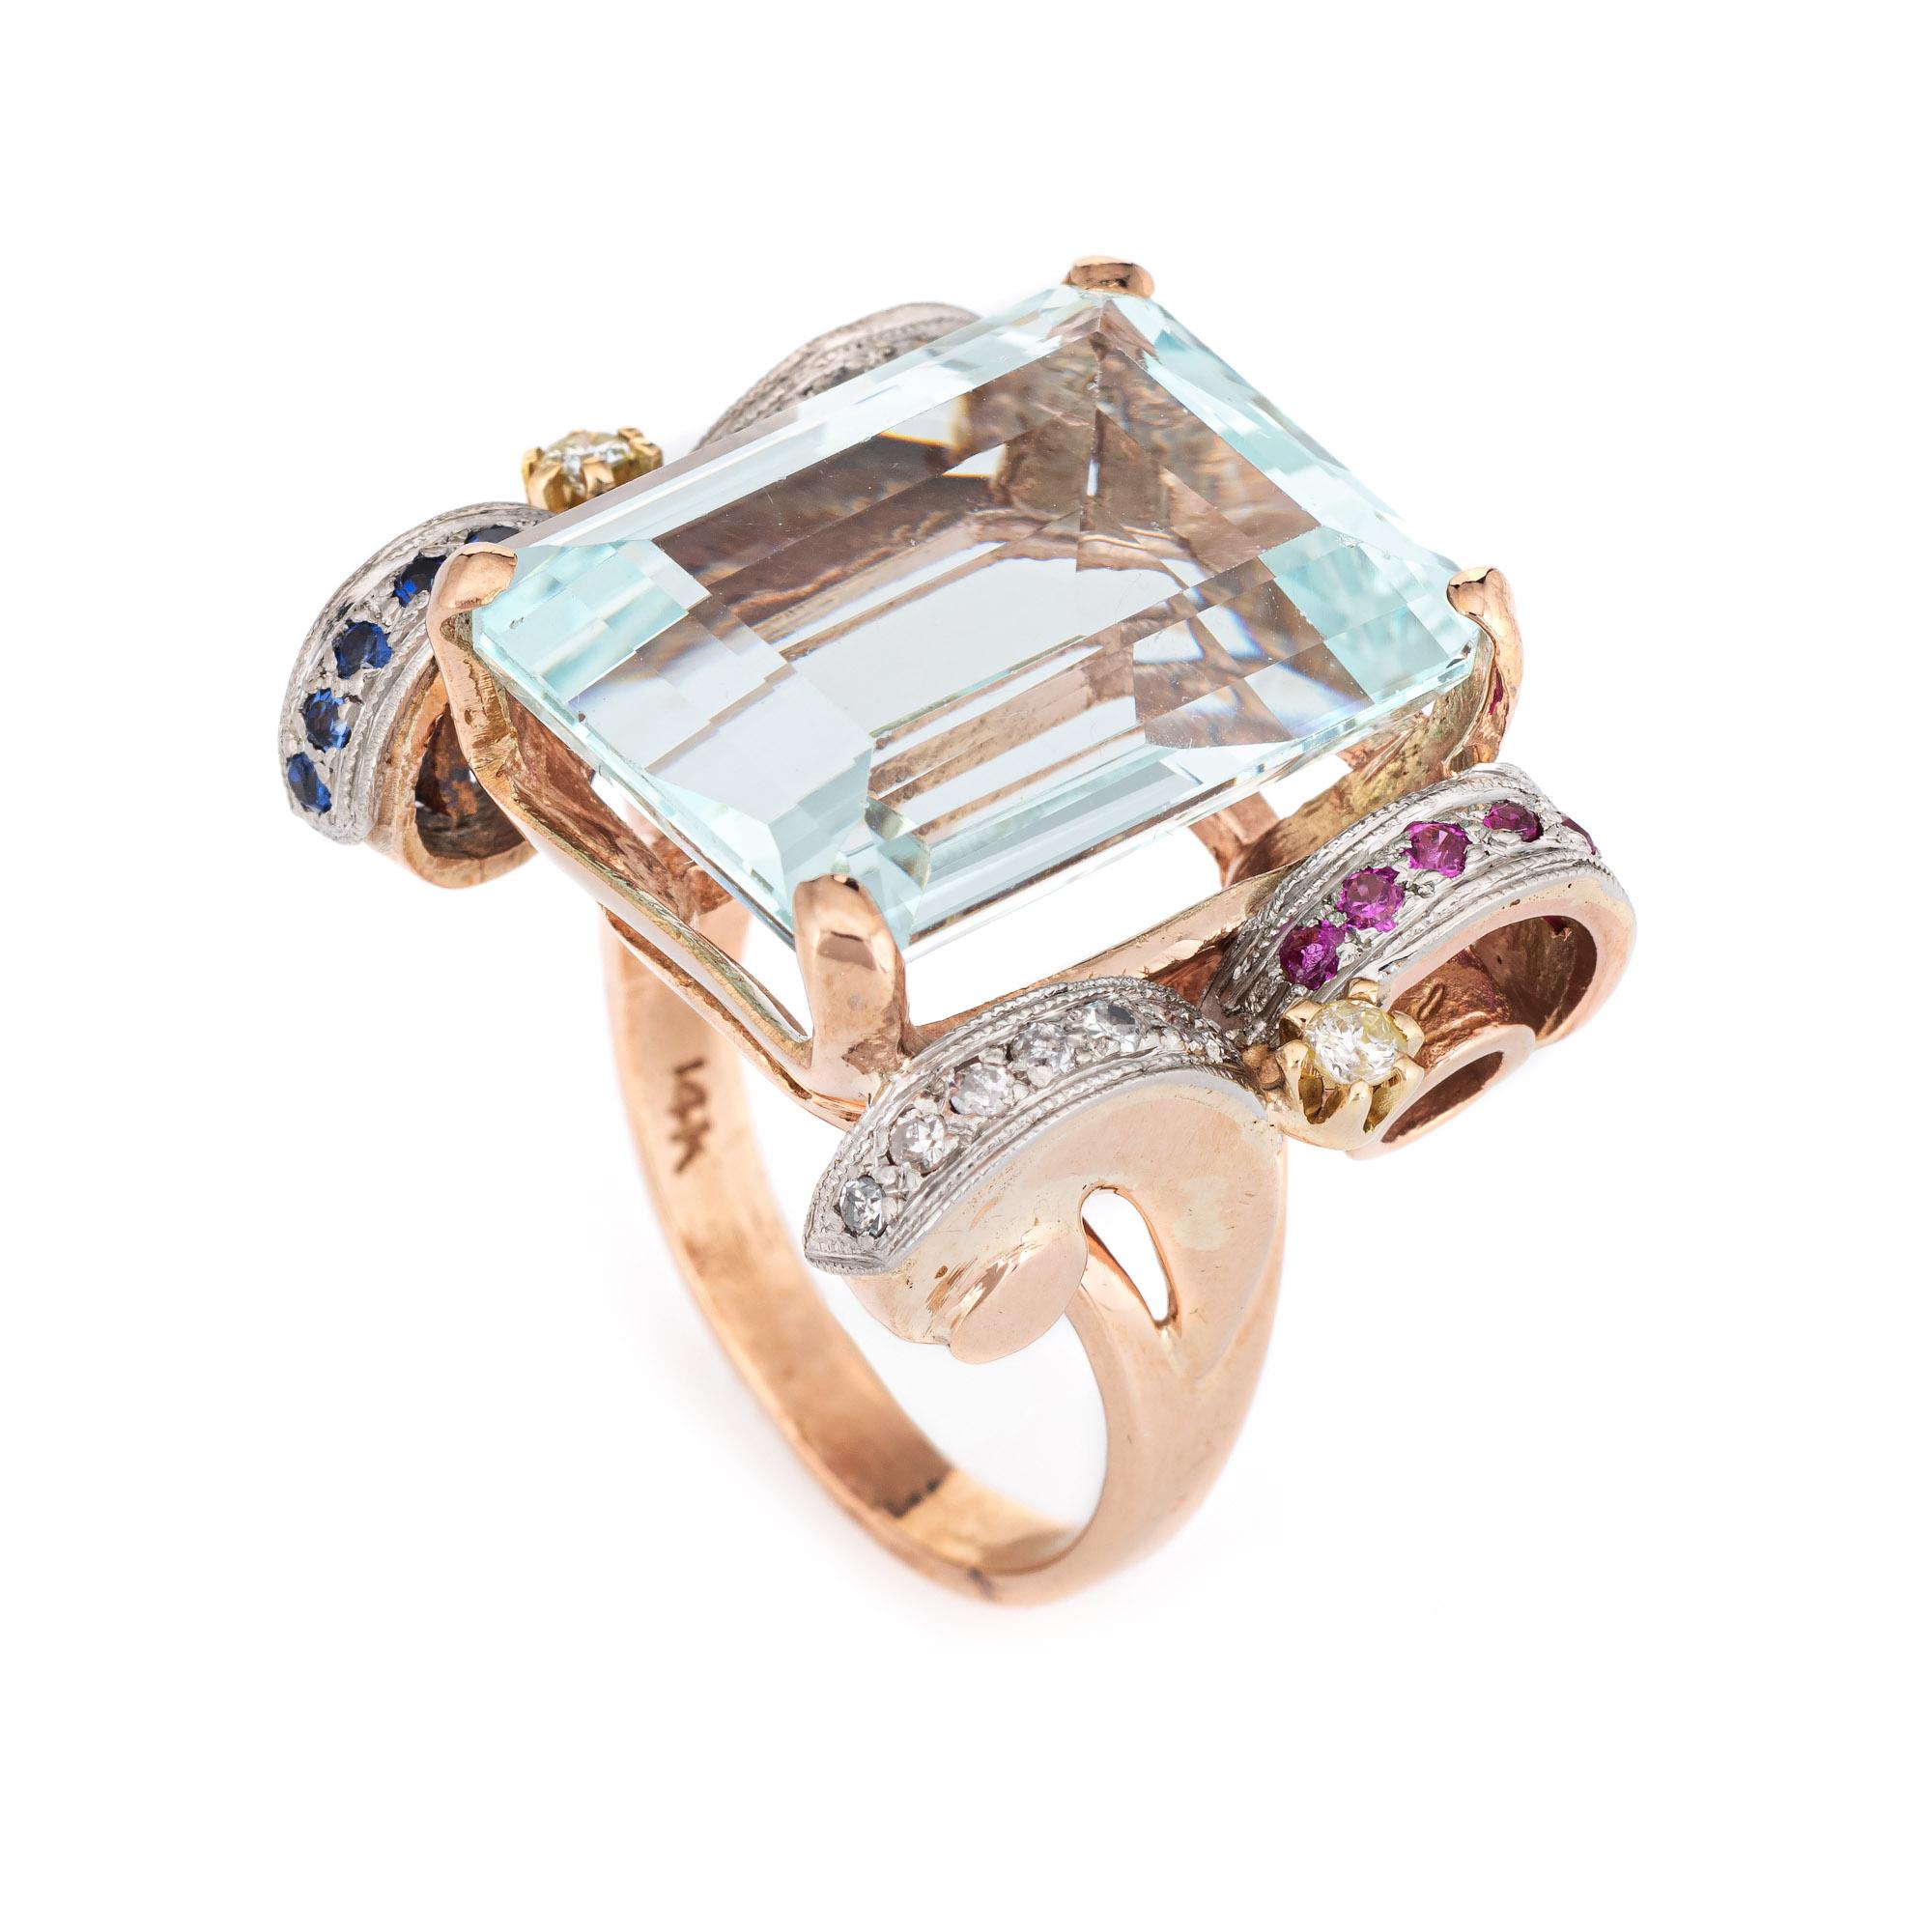 Stylish vintage aquamarine, diamond, sapphire & ruby ring (circa 1940s to 1950s) crafted in 14 karat rose gold. 

Emerald cut aquamarine measures 20mm x 15mm (estimated at 22 carats), accented with 0.15 carats of diamonds. The diamonds are estimated